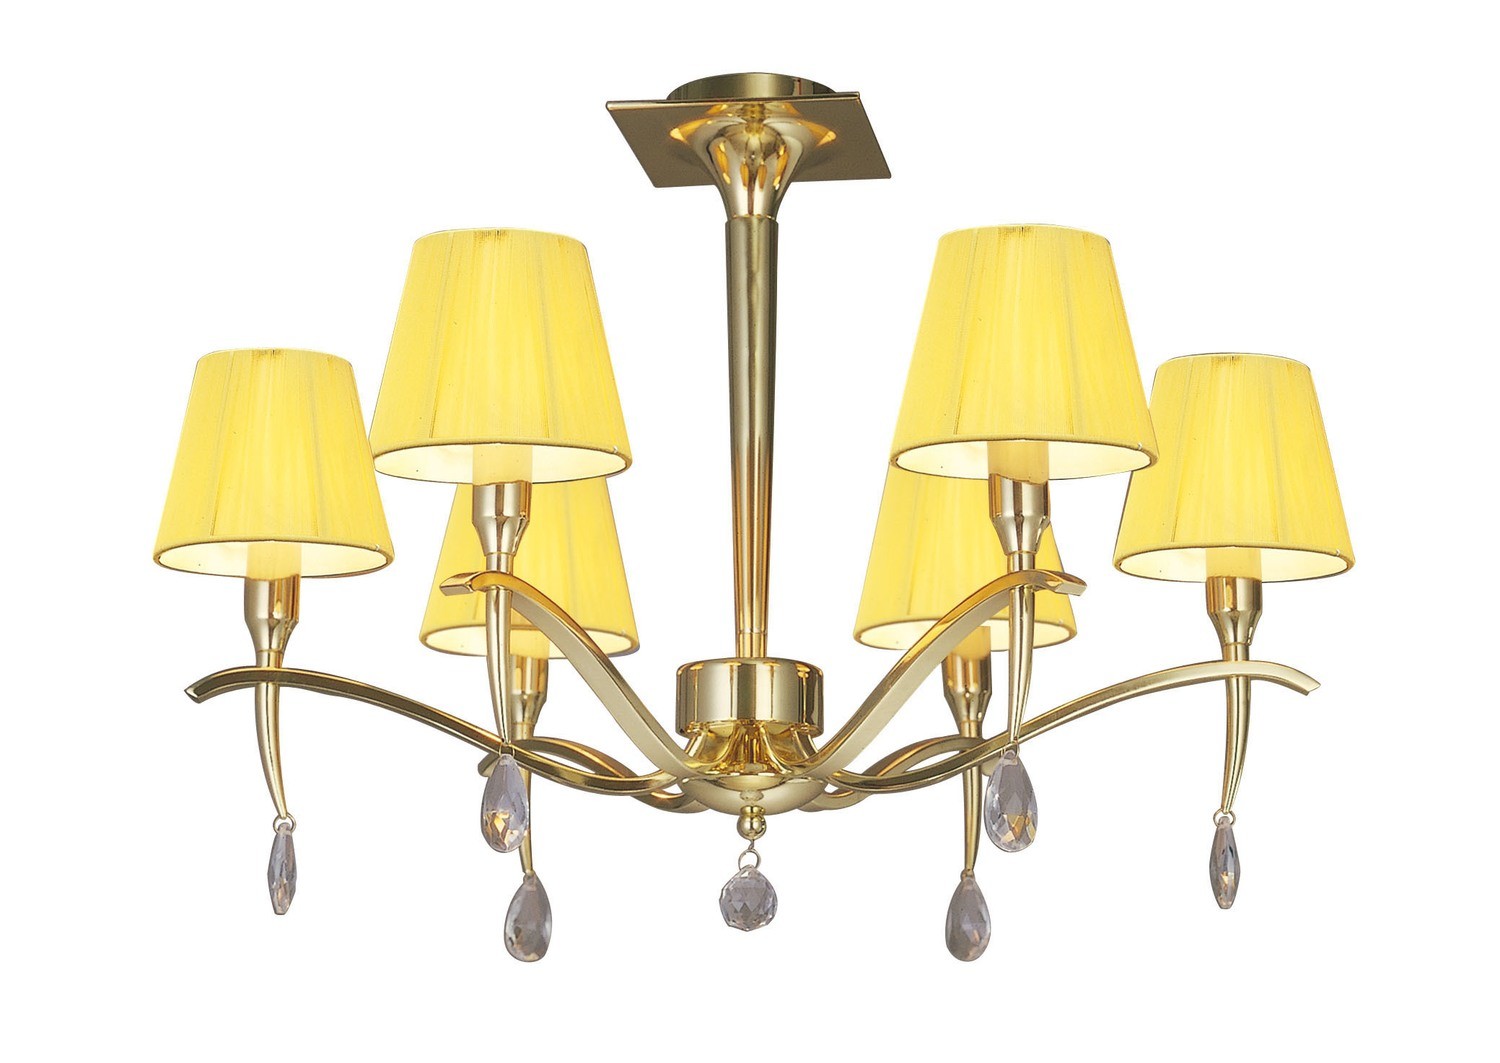 Siena Semi Ceiling Round 6 Light E14, Polished Brass With Amber Cream Shades And Clear Crystal